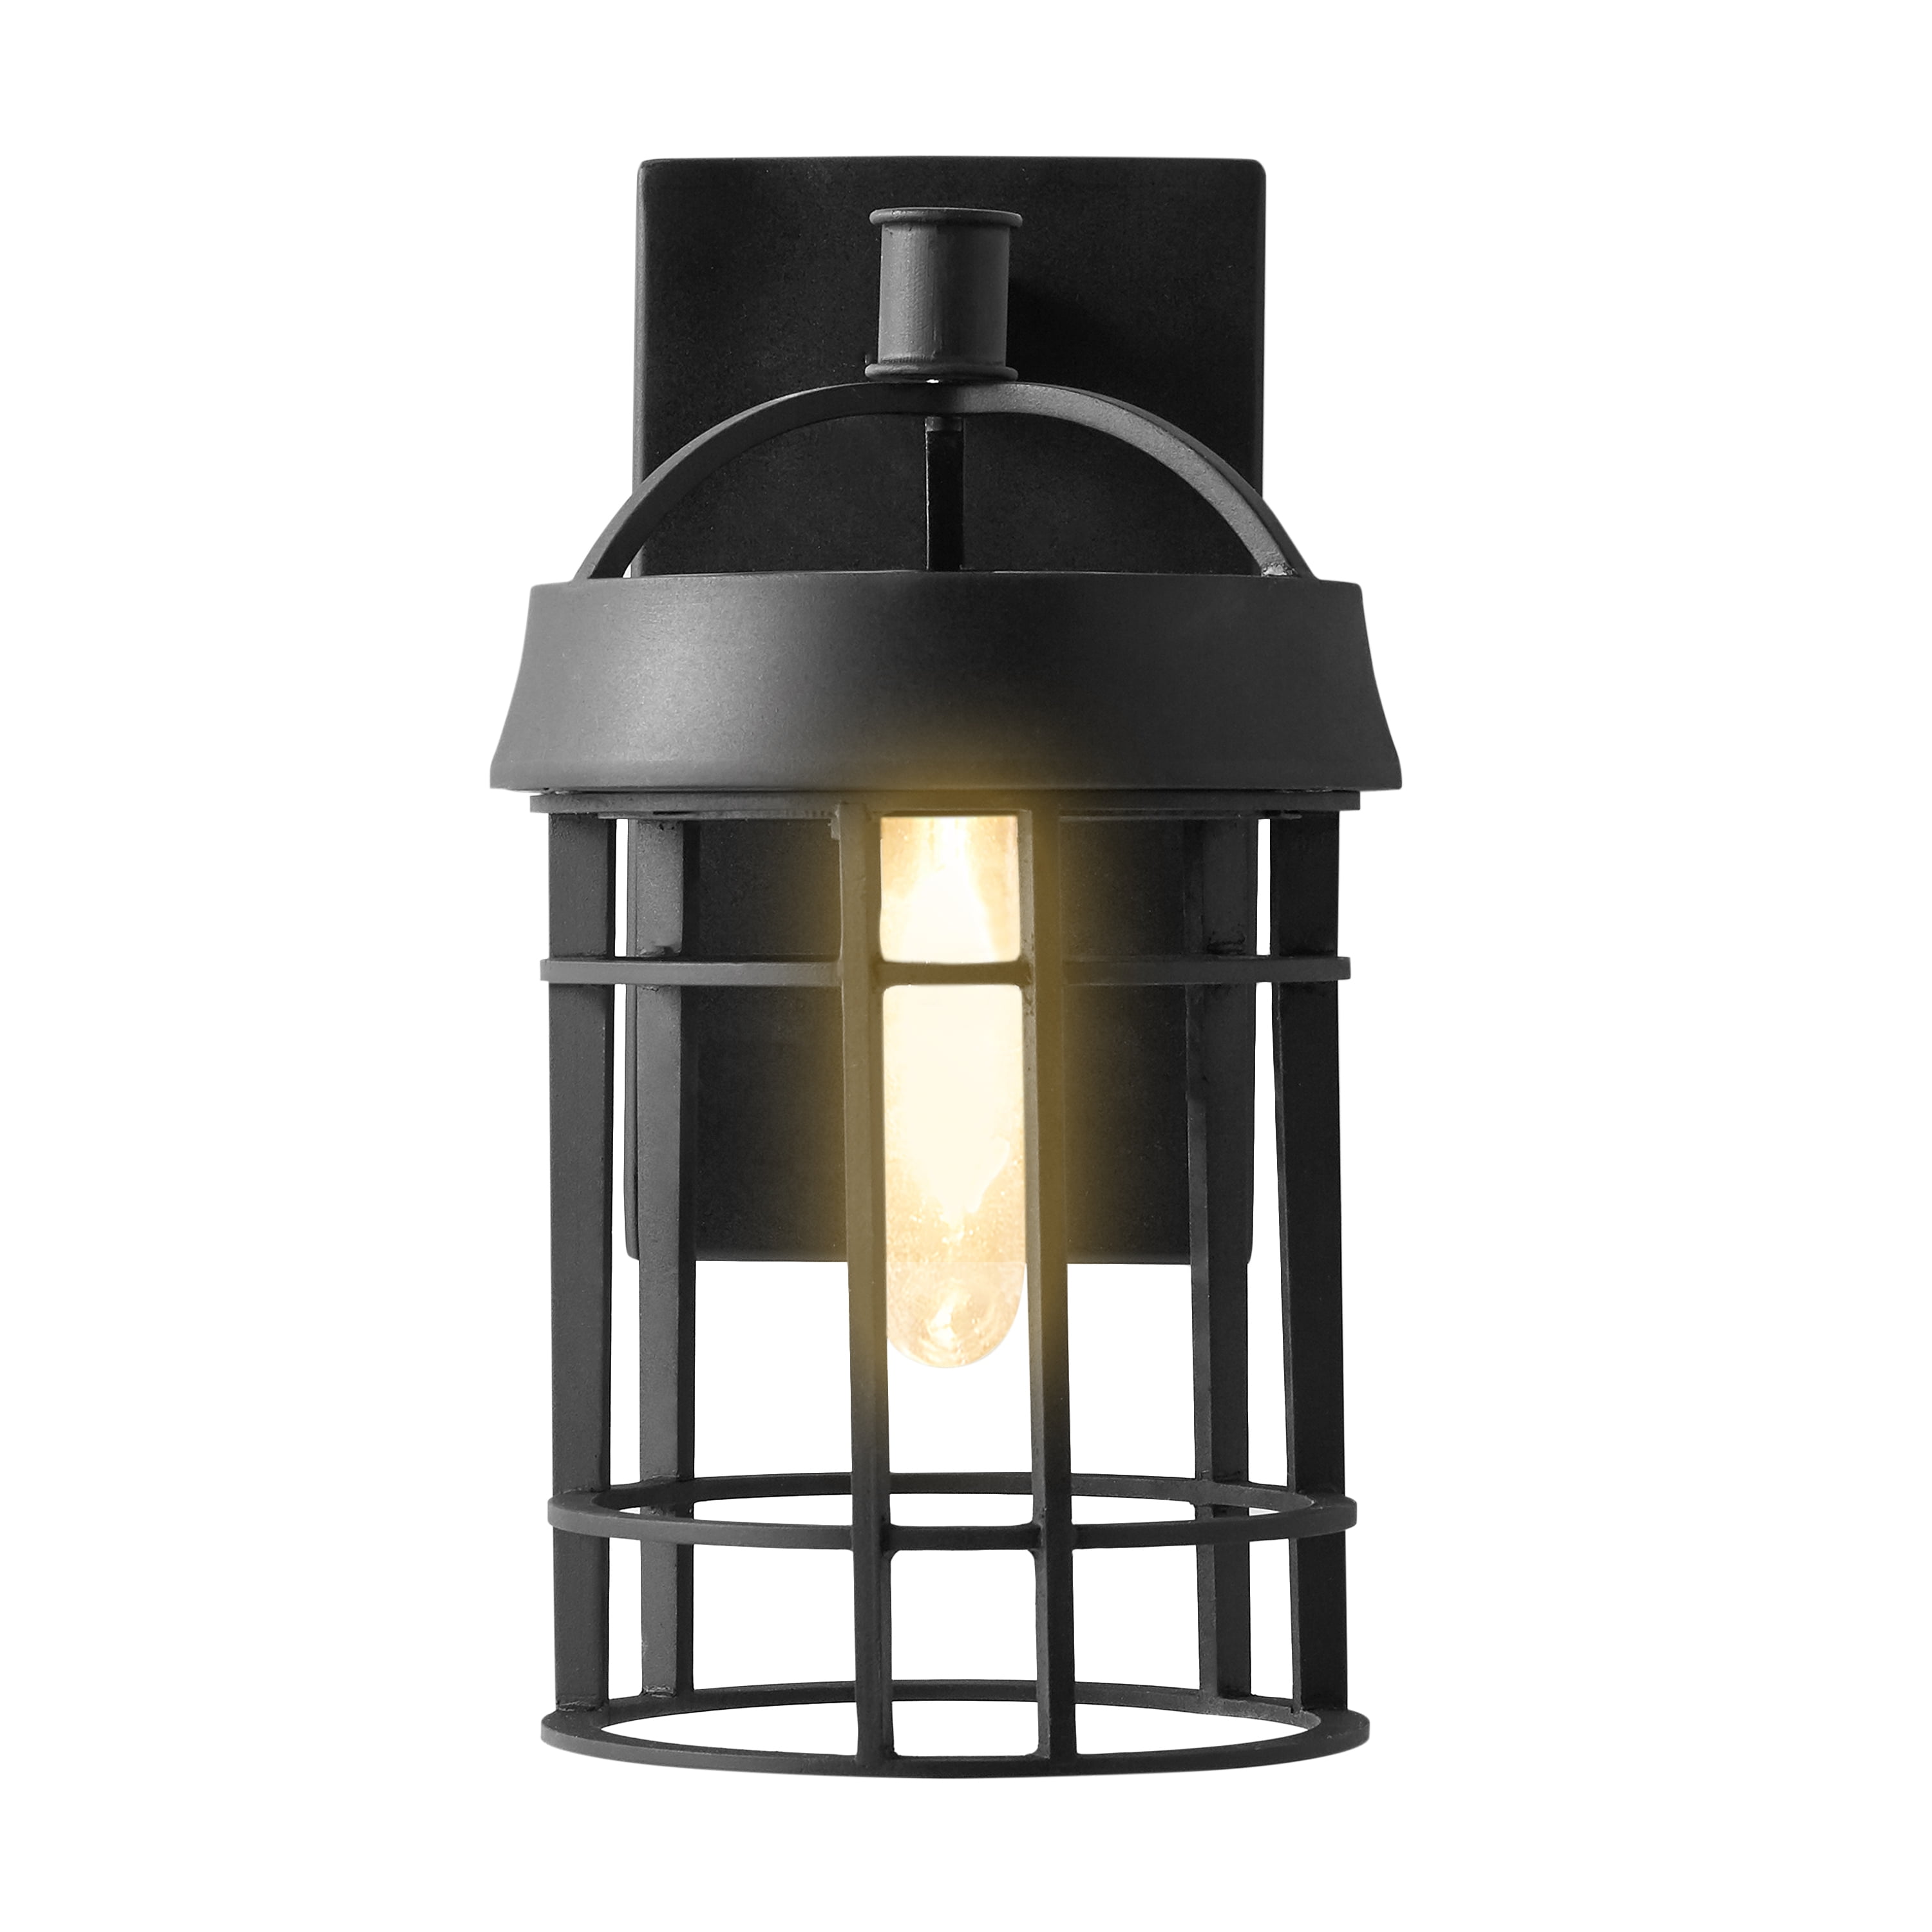 Retro Black Single Wall Mounted Light Sconce Outdoor Fixture Home Gardern Lamps 